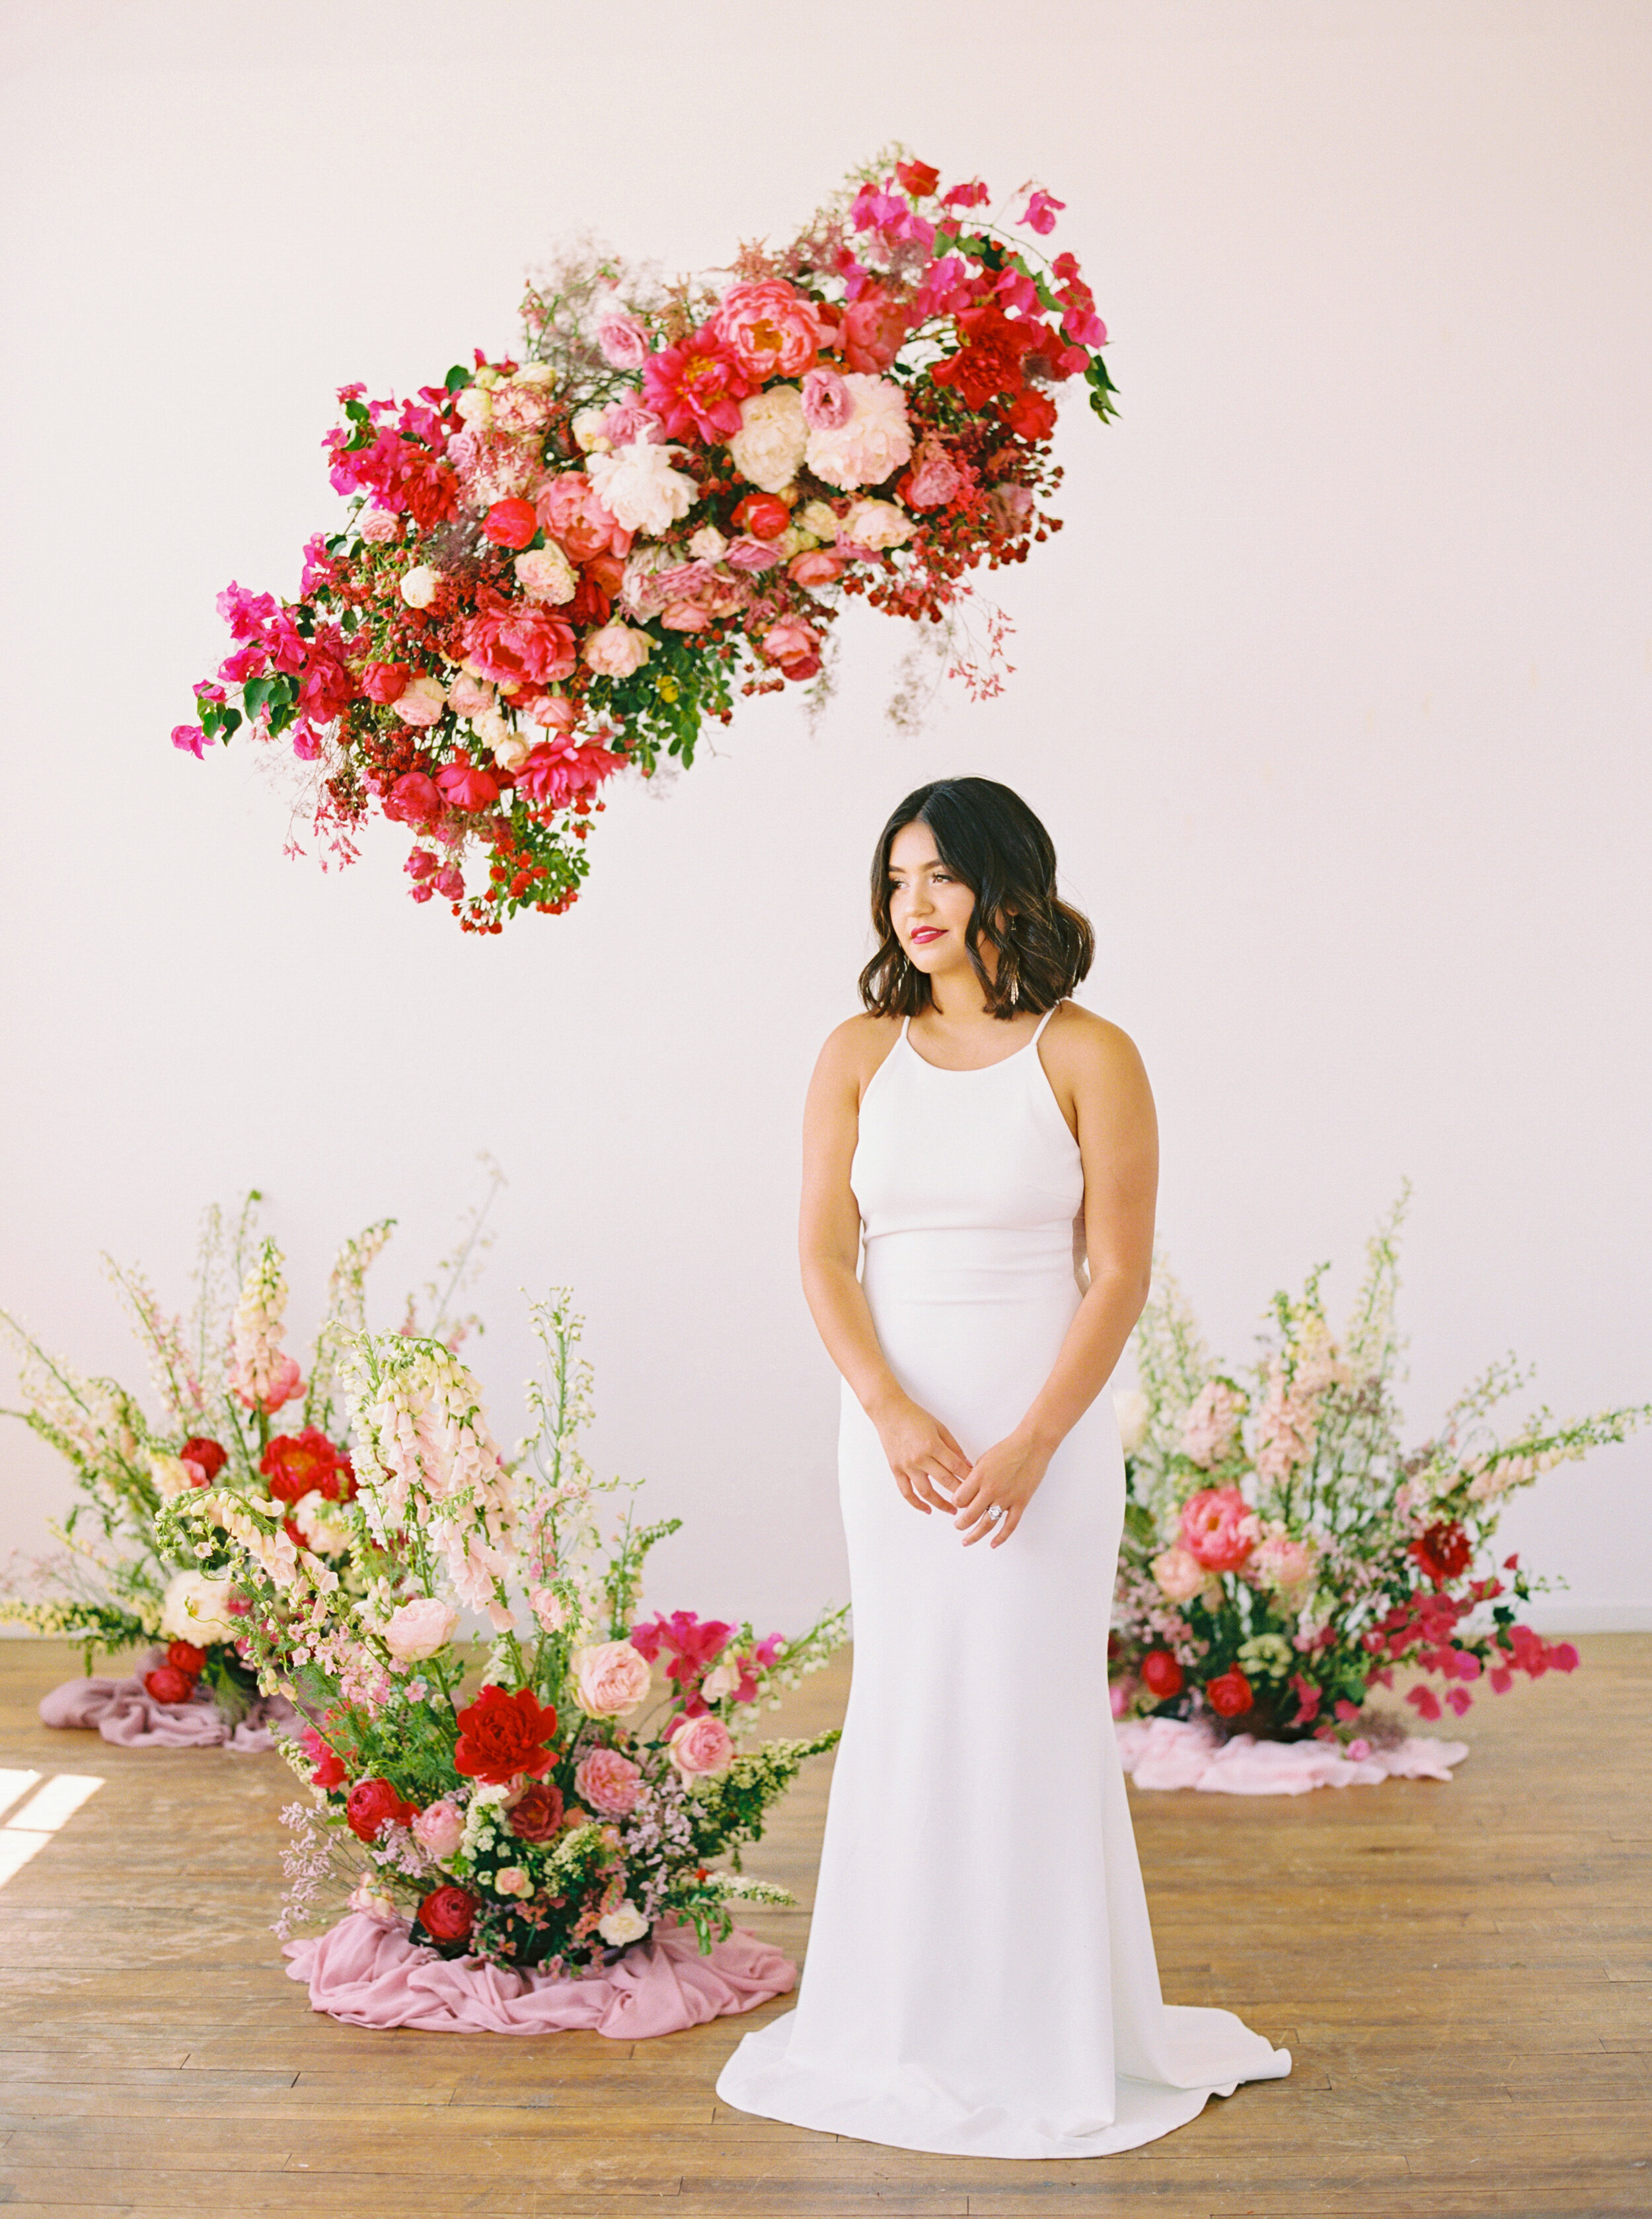 A Romantic Wedding Elopement Filled with Colorful Fuchsia - Sarahi Hadden Submission-71.jpg